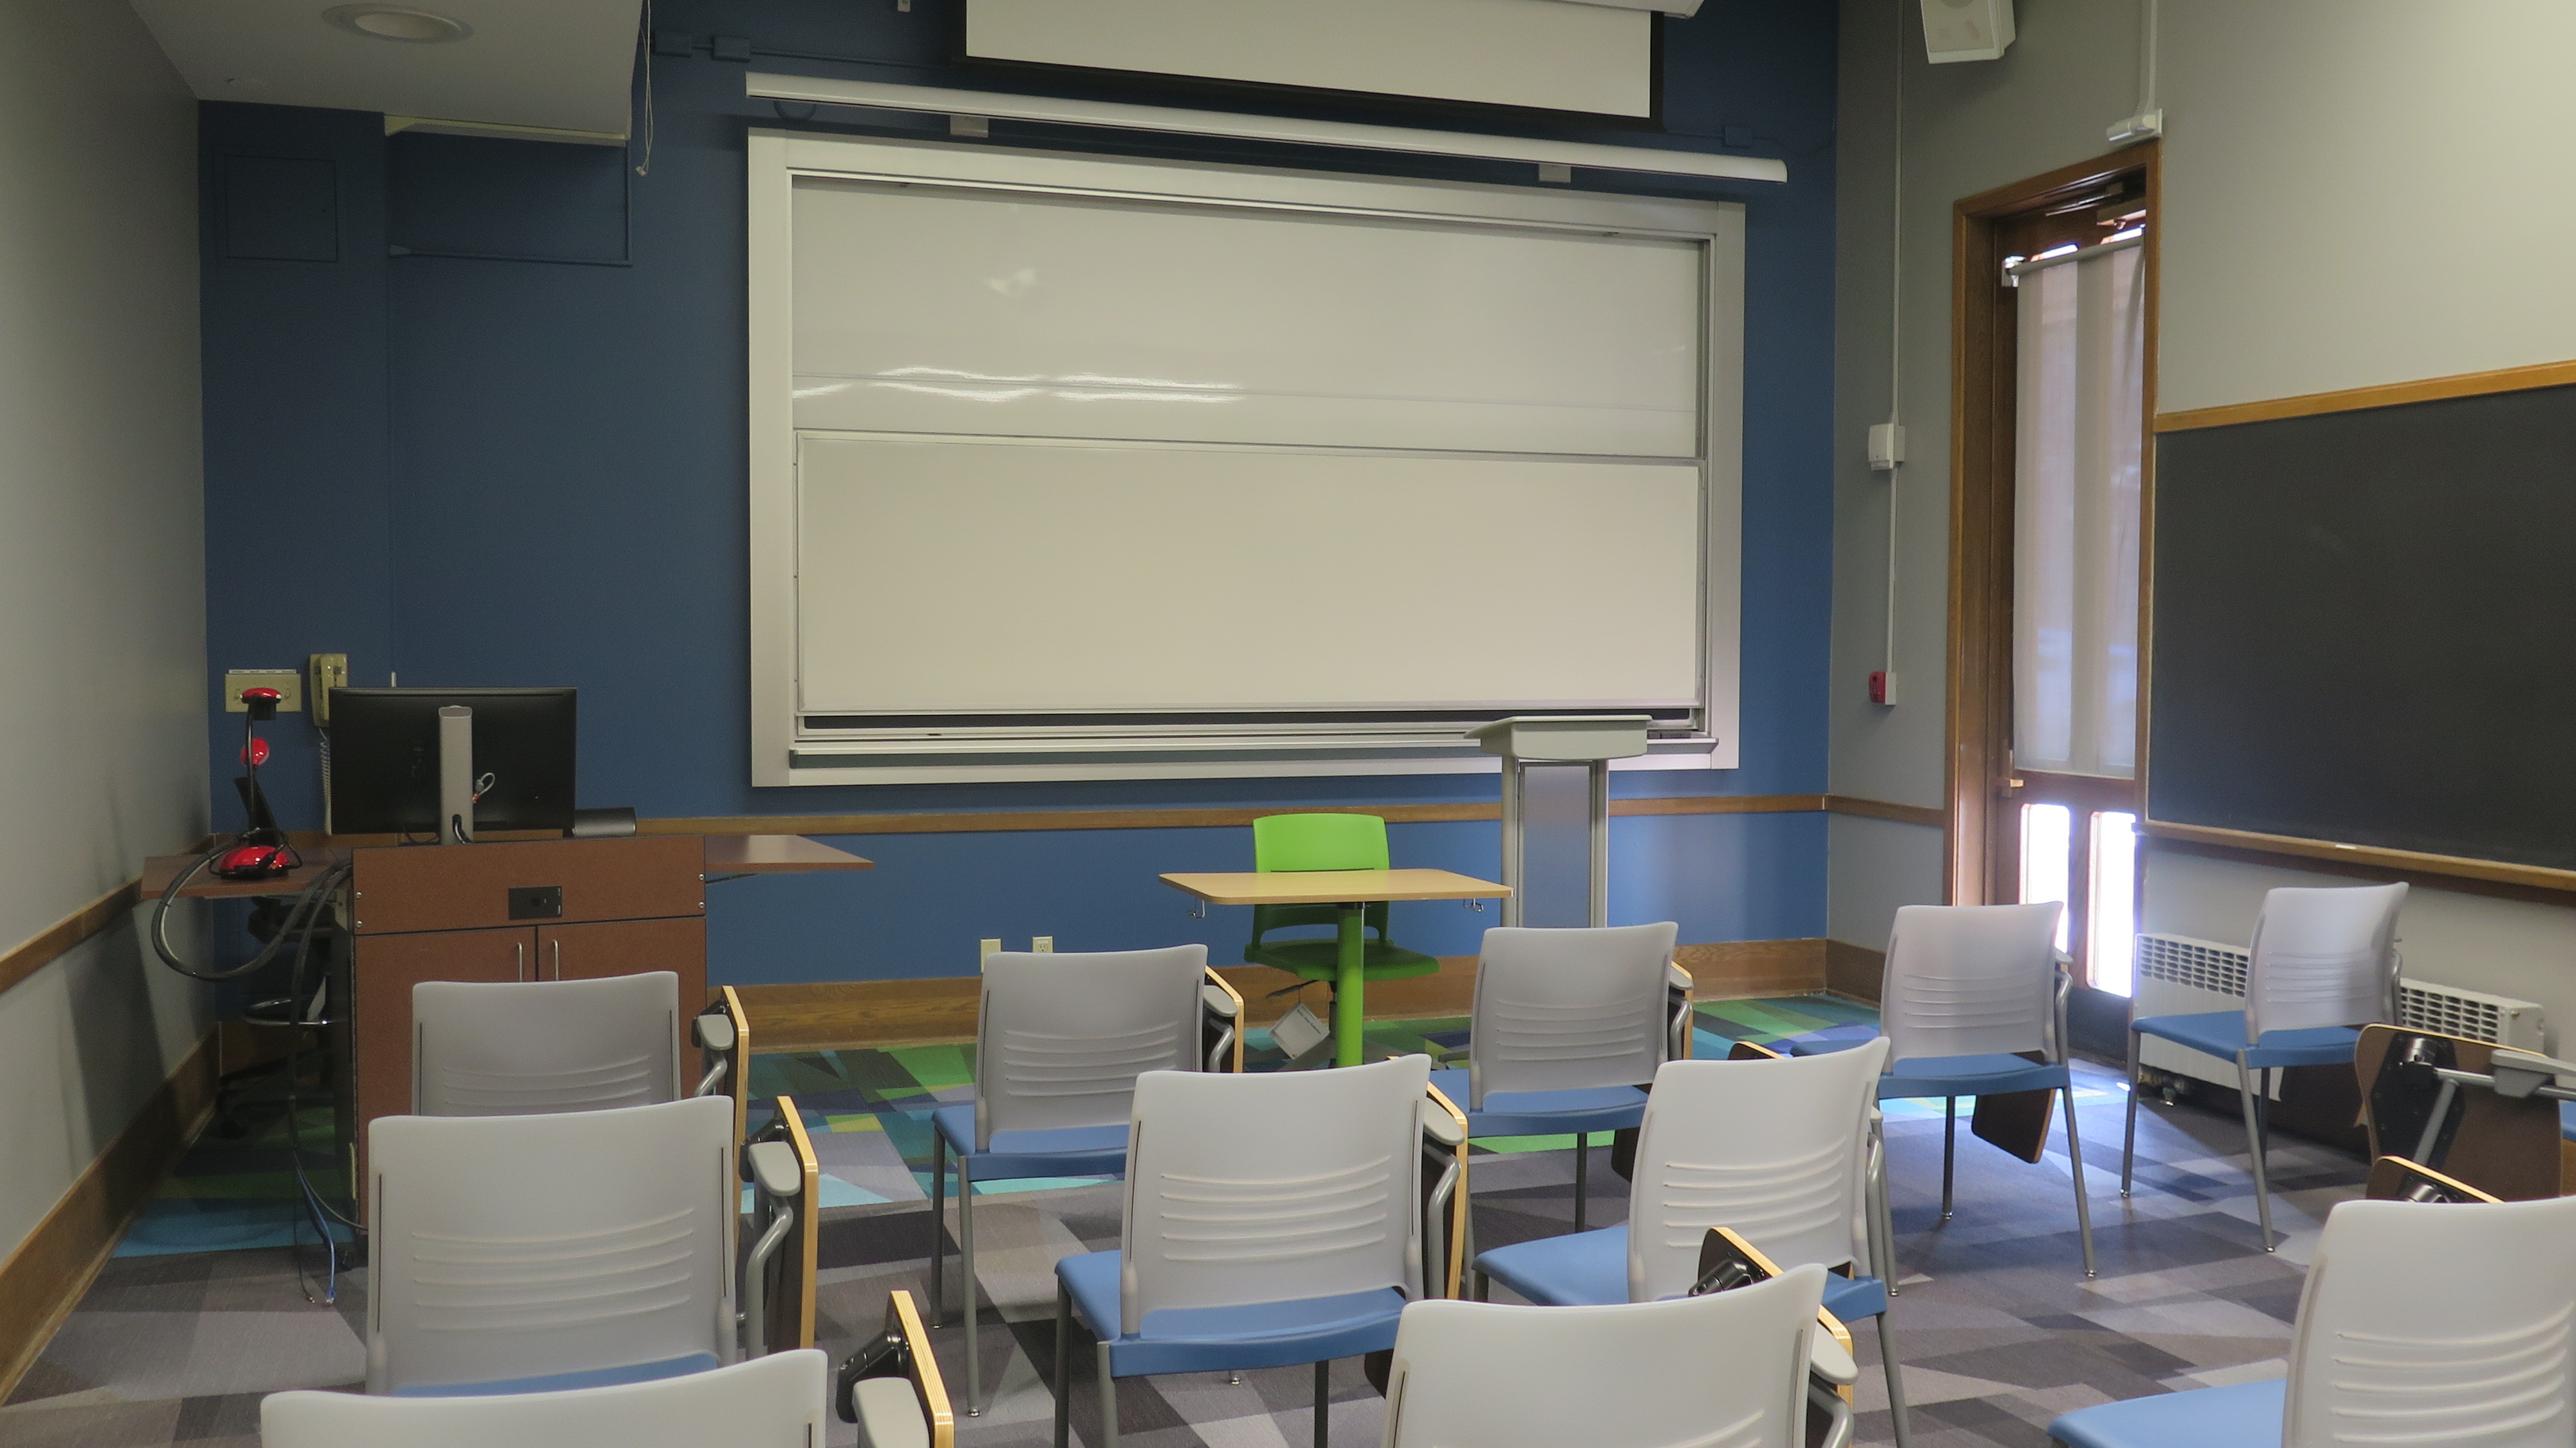 View from the back of the room, Carpet, Moveable tablet arm chairs and podium. Whiteboard on the front wall of classroom